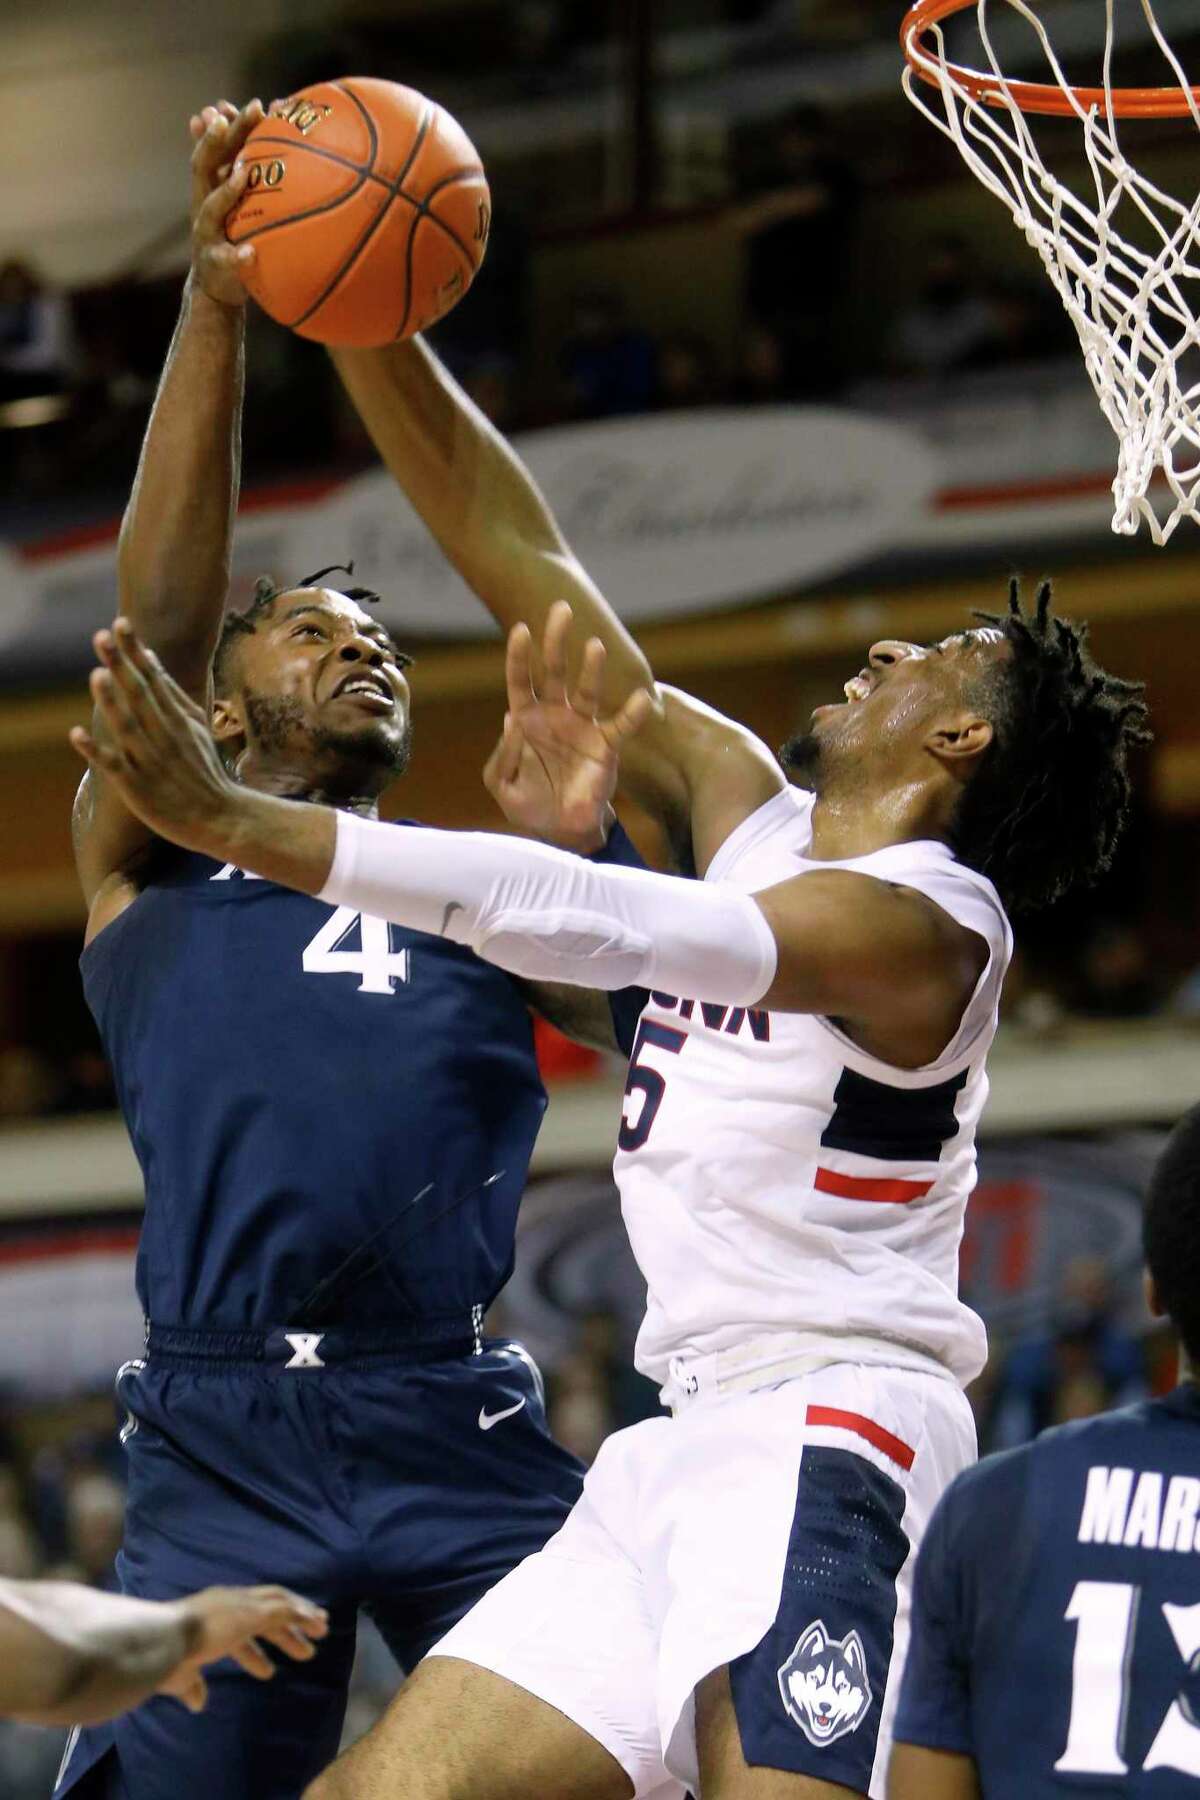 Xavier's Tyrique Jones, at left, goes up for a shot against the defense of Connecticut's Isaiah Whaley in the first half of an NCAA college basketball game during the Charleston Classic Friday, Nov. 22, 2019, in Charleston, SC. (AP Photo/Mic Smith)